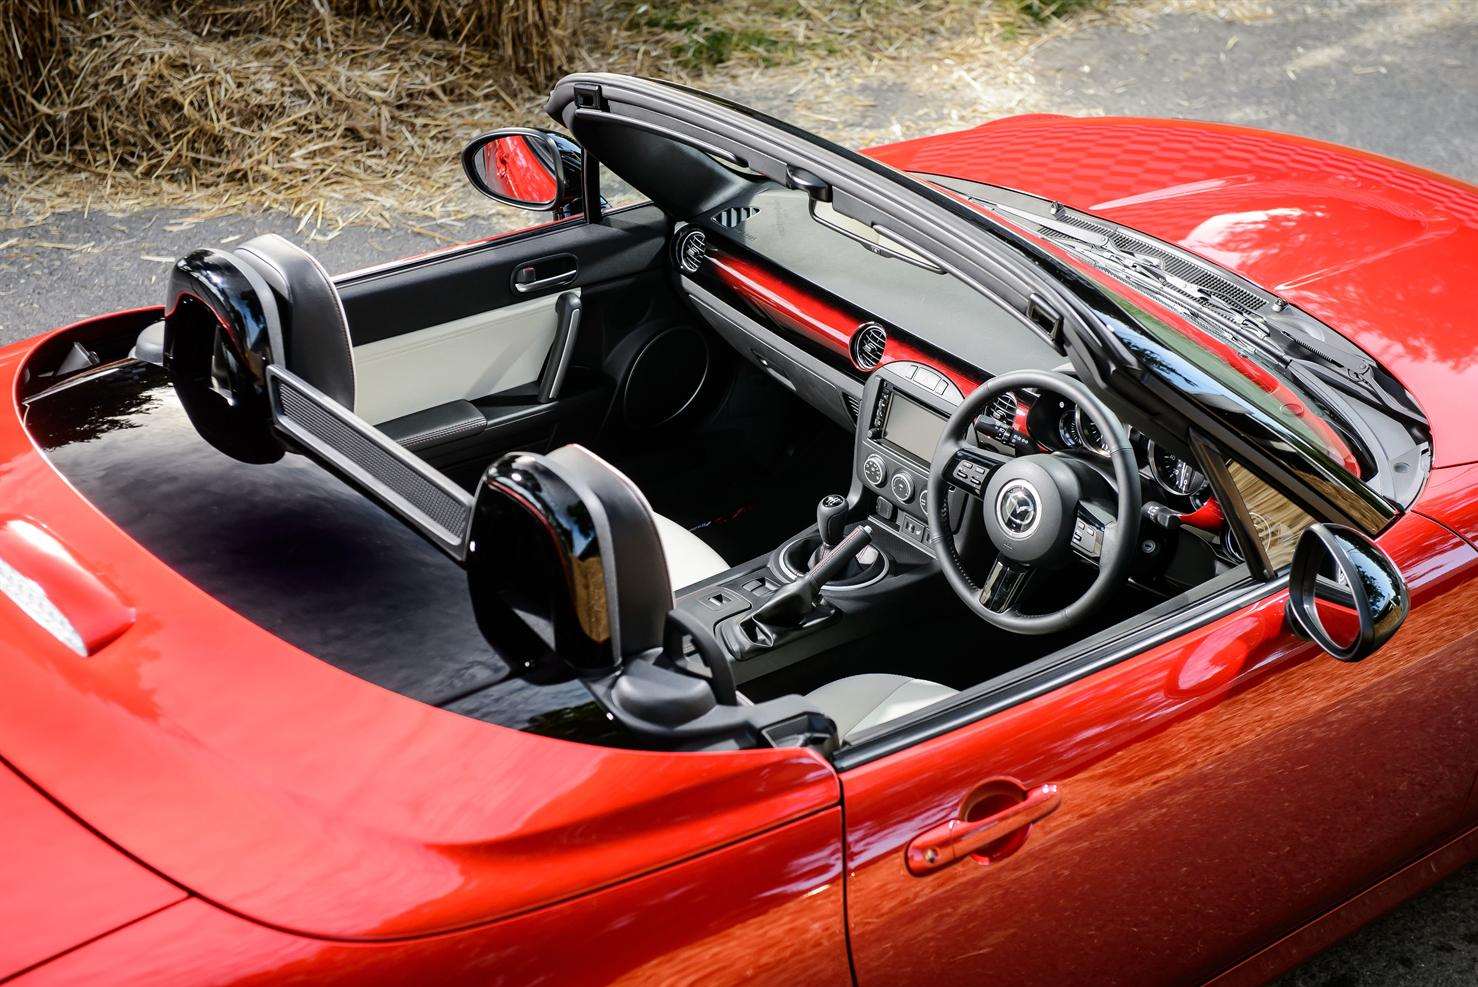 There's more room in the third generation MX-5 but finding the perfect driving position can be difficult